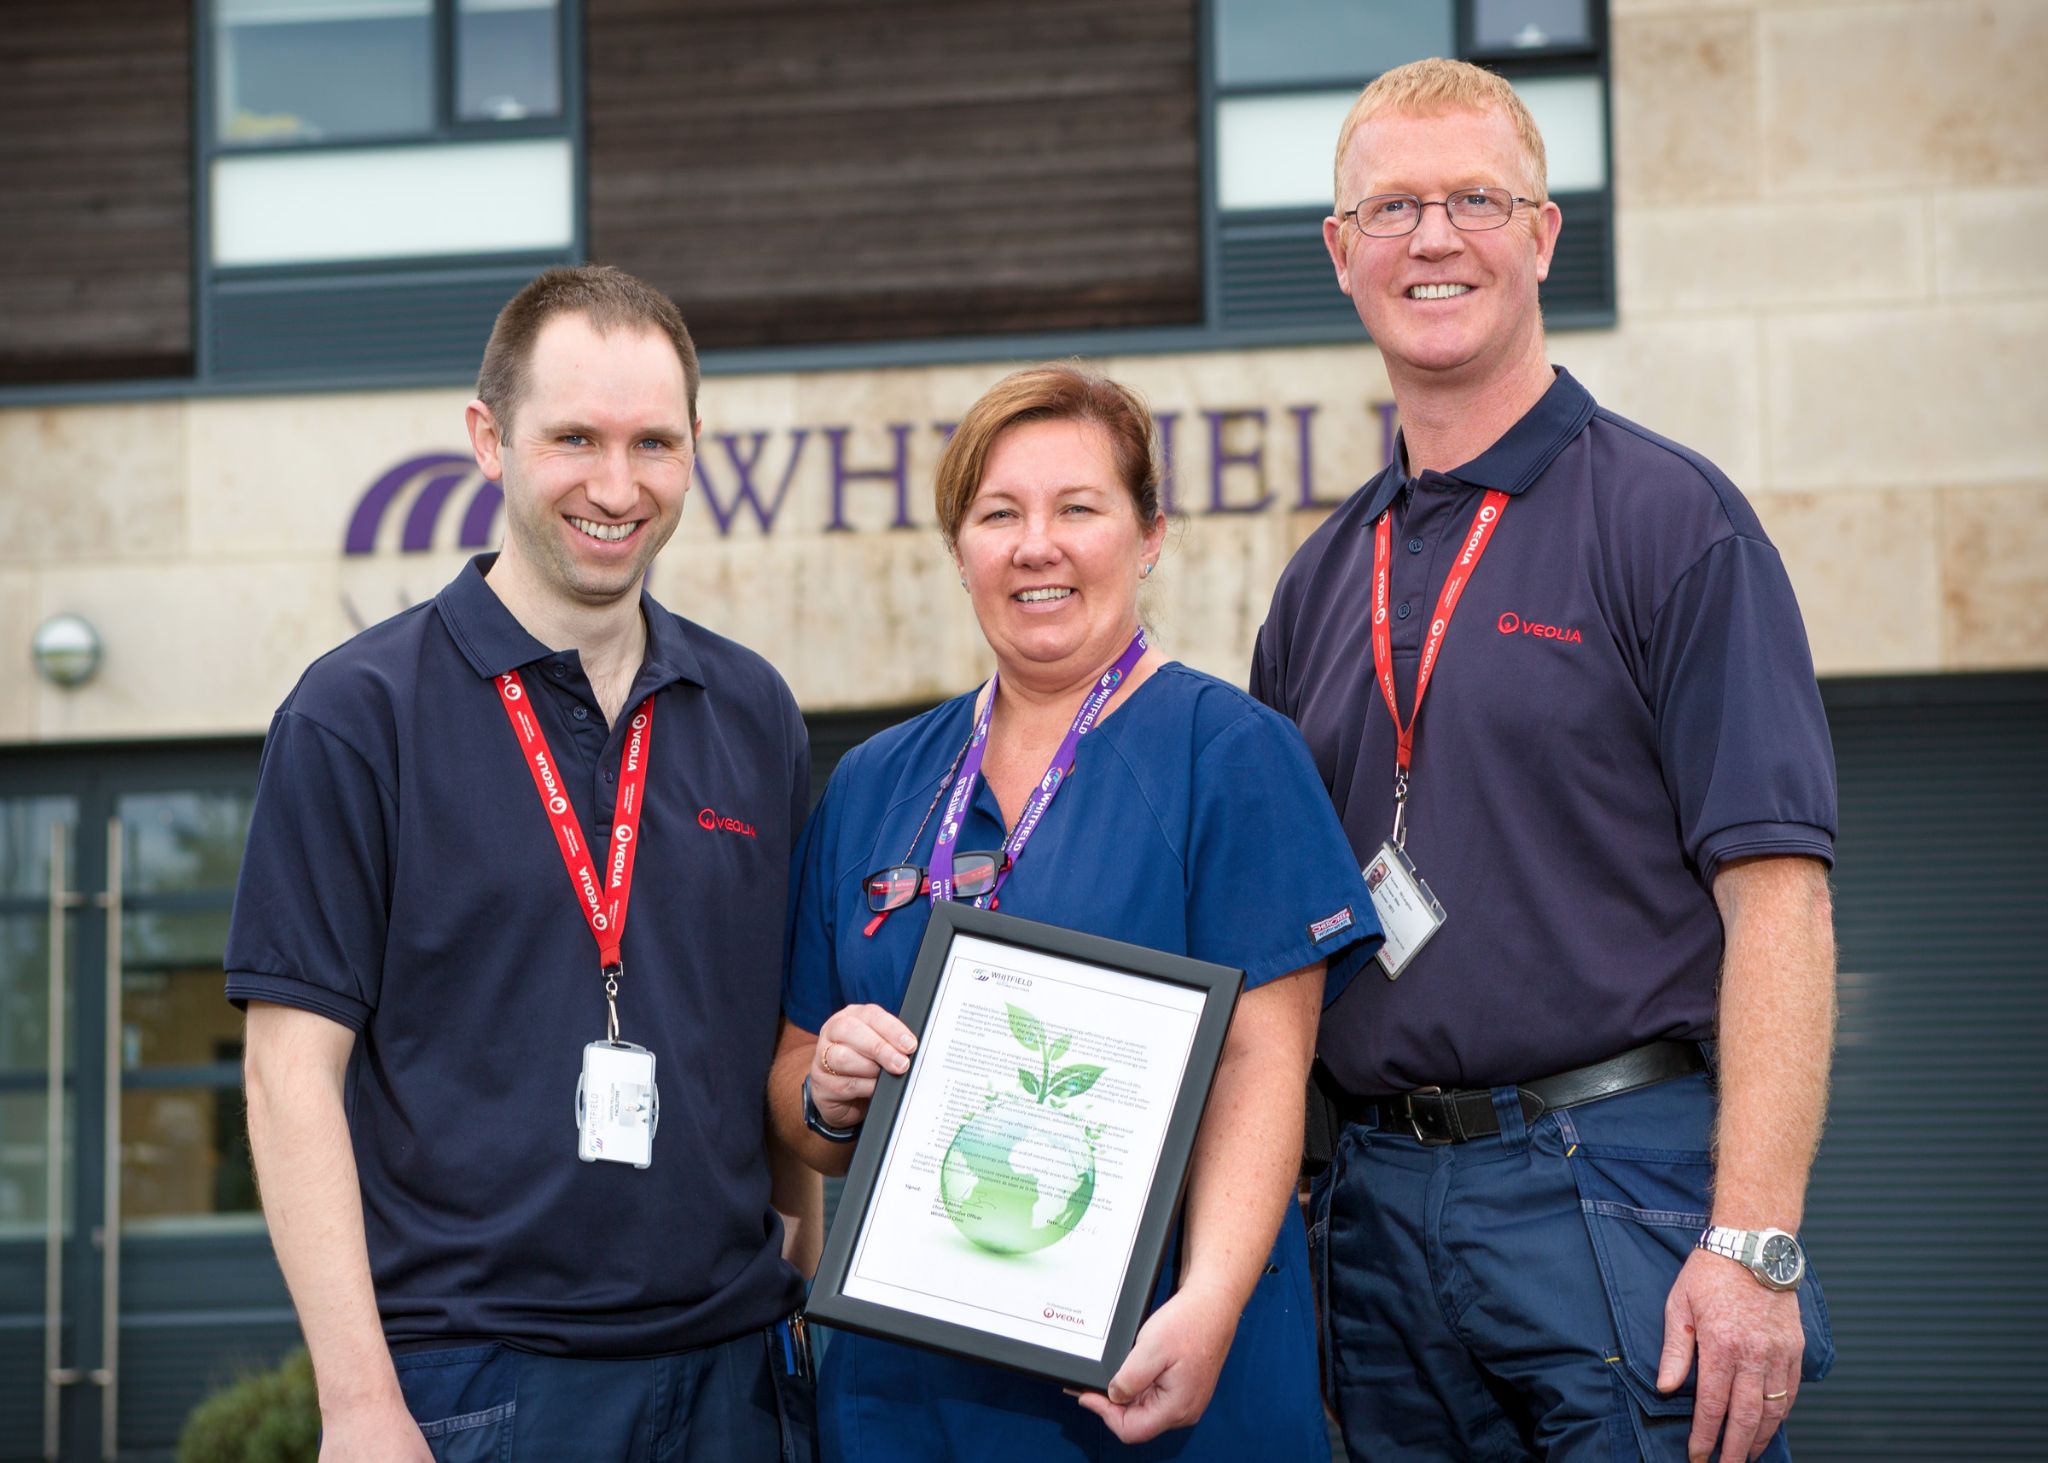 Whitfield Clinic is the first hospital to achieve ISO50001 energy management accreditation